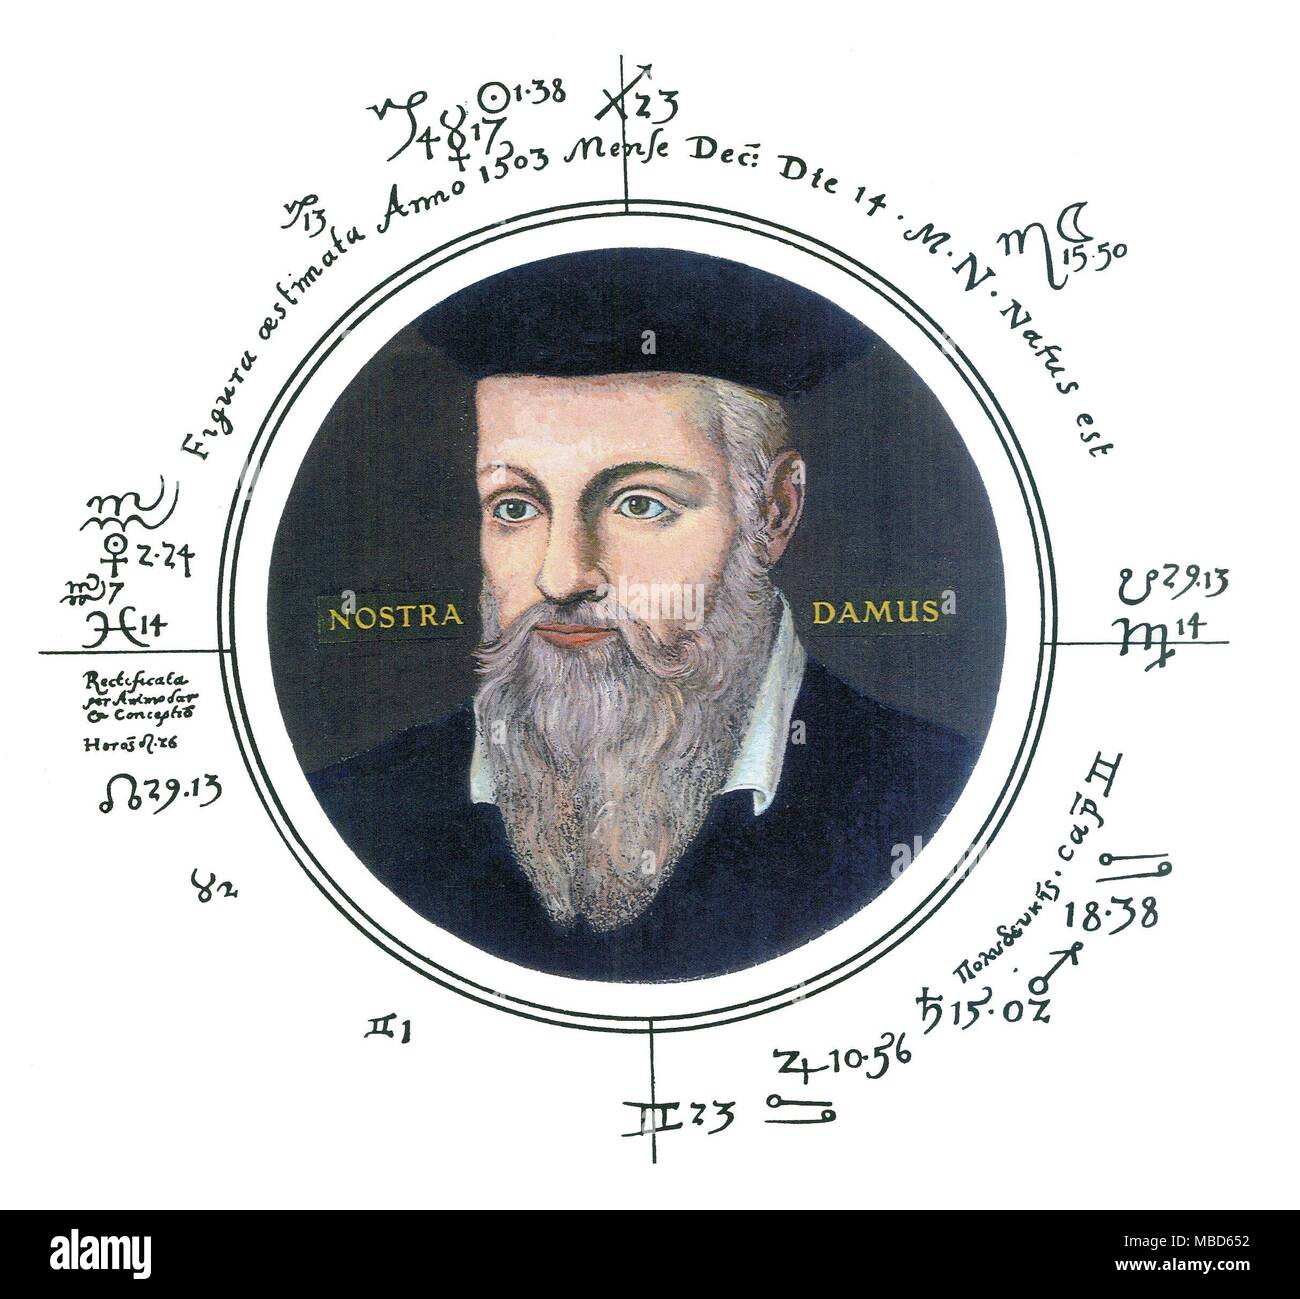 HOROSCOPES - NOSTRADAMUS Nostradamus was born in St-Rémy, Provence, at 12:14:20 pm, local time, on 14 December 1503. This data is derived from the careful study of the horoscope of Nostradamus, in David Ovason, The Secrets of Nostradamus. A Radical New Interpretation of the Master's Prophecies, 2001, pp. 377-391. The portrait in the present chart is one based on the picture painted by César, the son of Nostradamus, which is now in the Bibliothèque de la Mesjanes, Aix-en-Provence. The sigillization, rectification method, and representation of stellar influences, within this chart, a Stock Photo